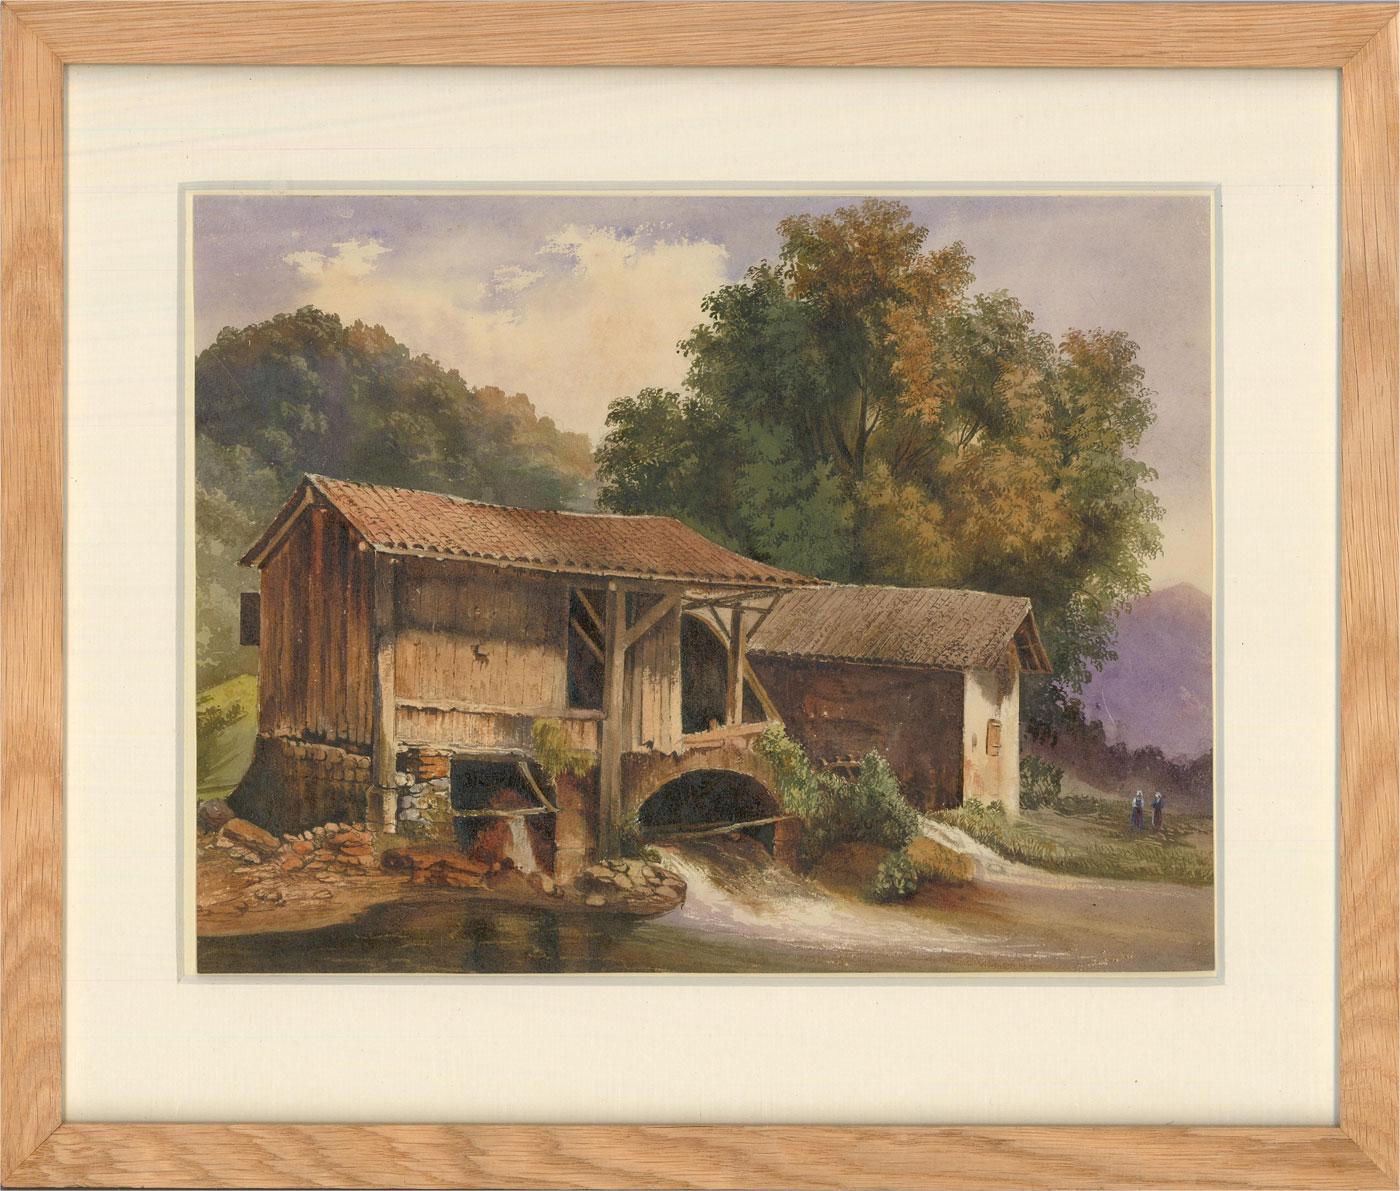 A crisp and vibrant watercolor study of a riverside mill house, with two female workers conversing in a distant field. The rustic characteristics of the mill have been carefully captured in delicate brush strokes by the artist. Encompassed by a